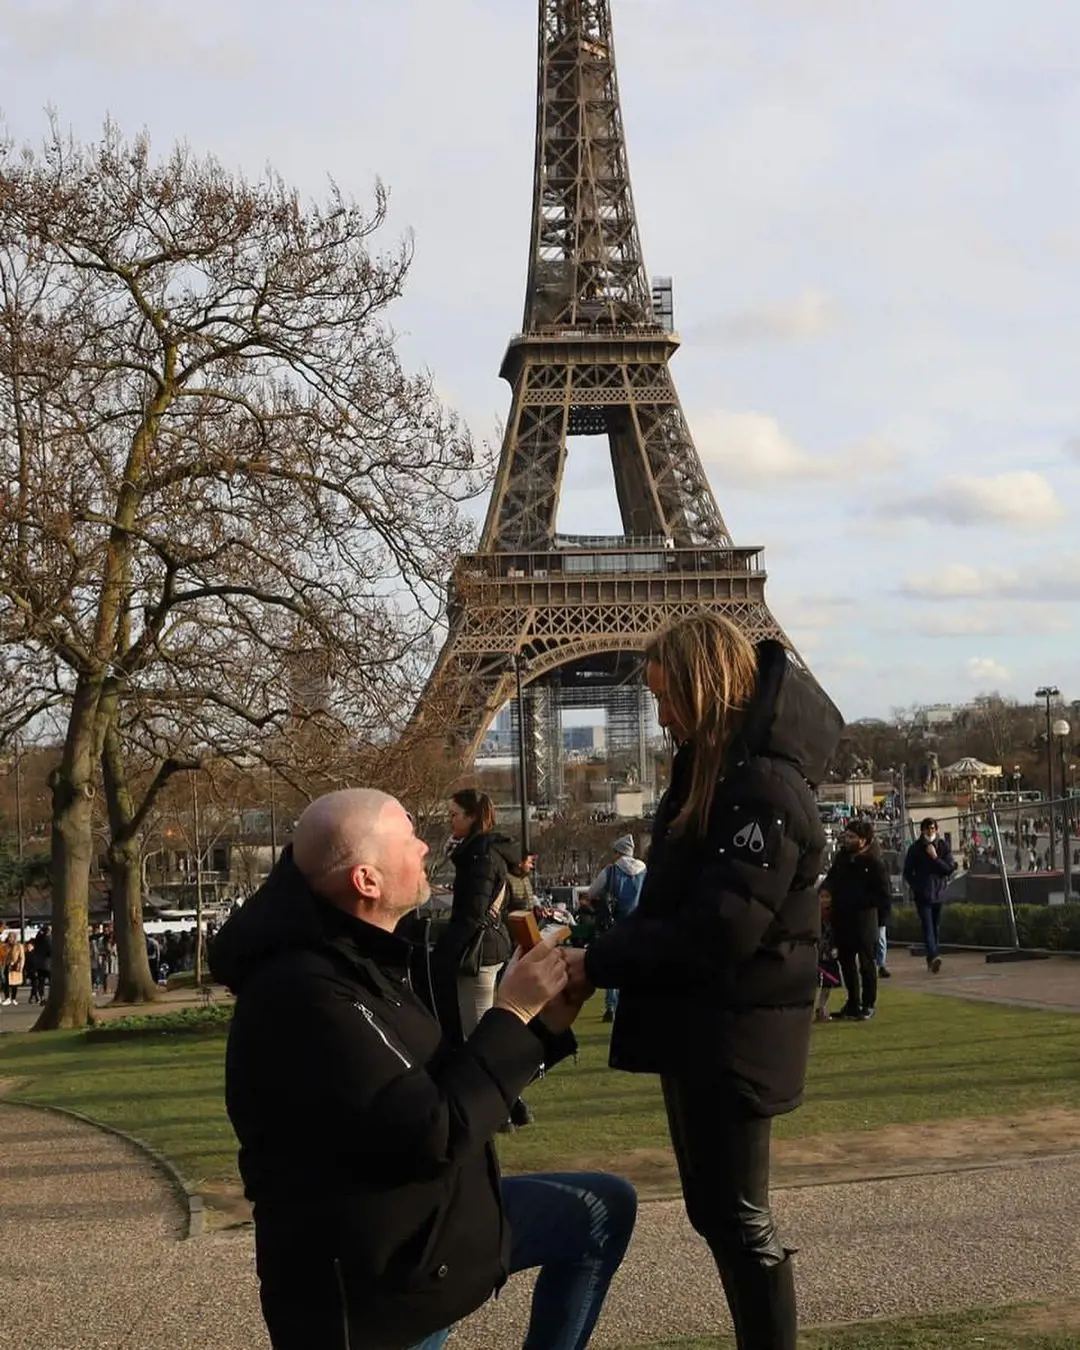 Raymond proposed to his partner in February.